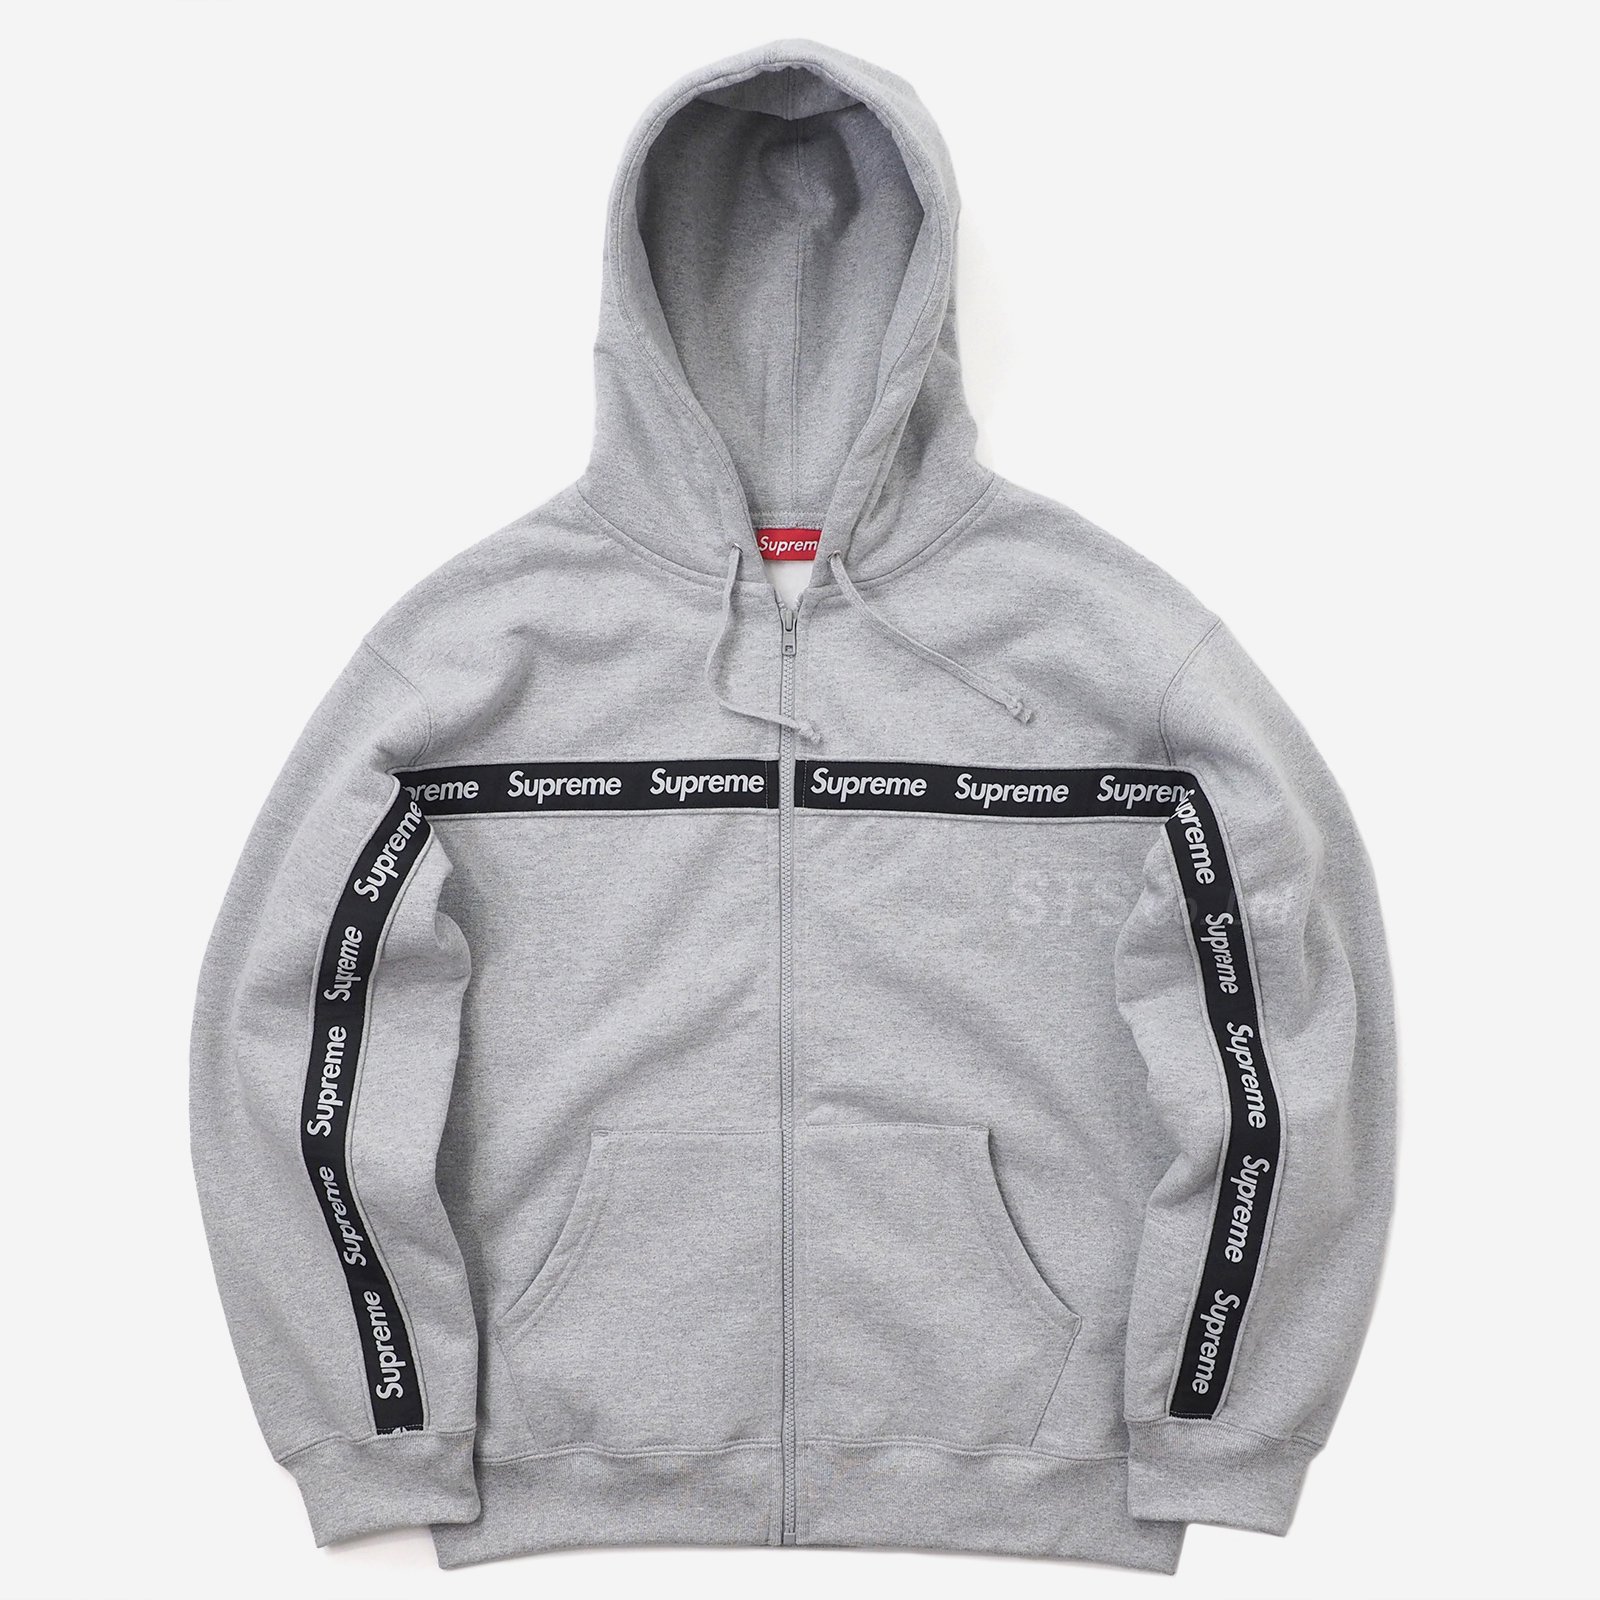 Supreme Text Stripe Zip Up Hooded